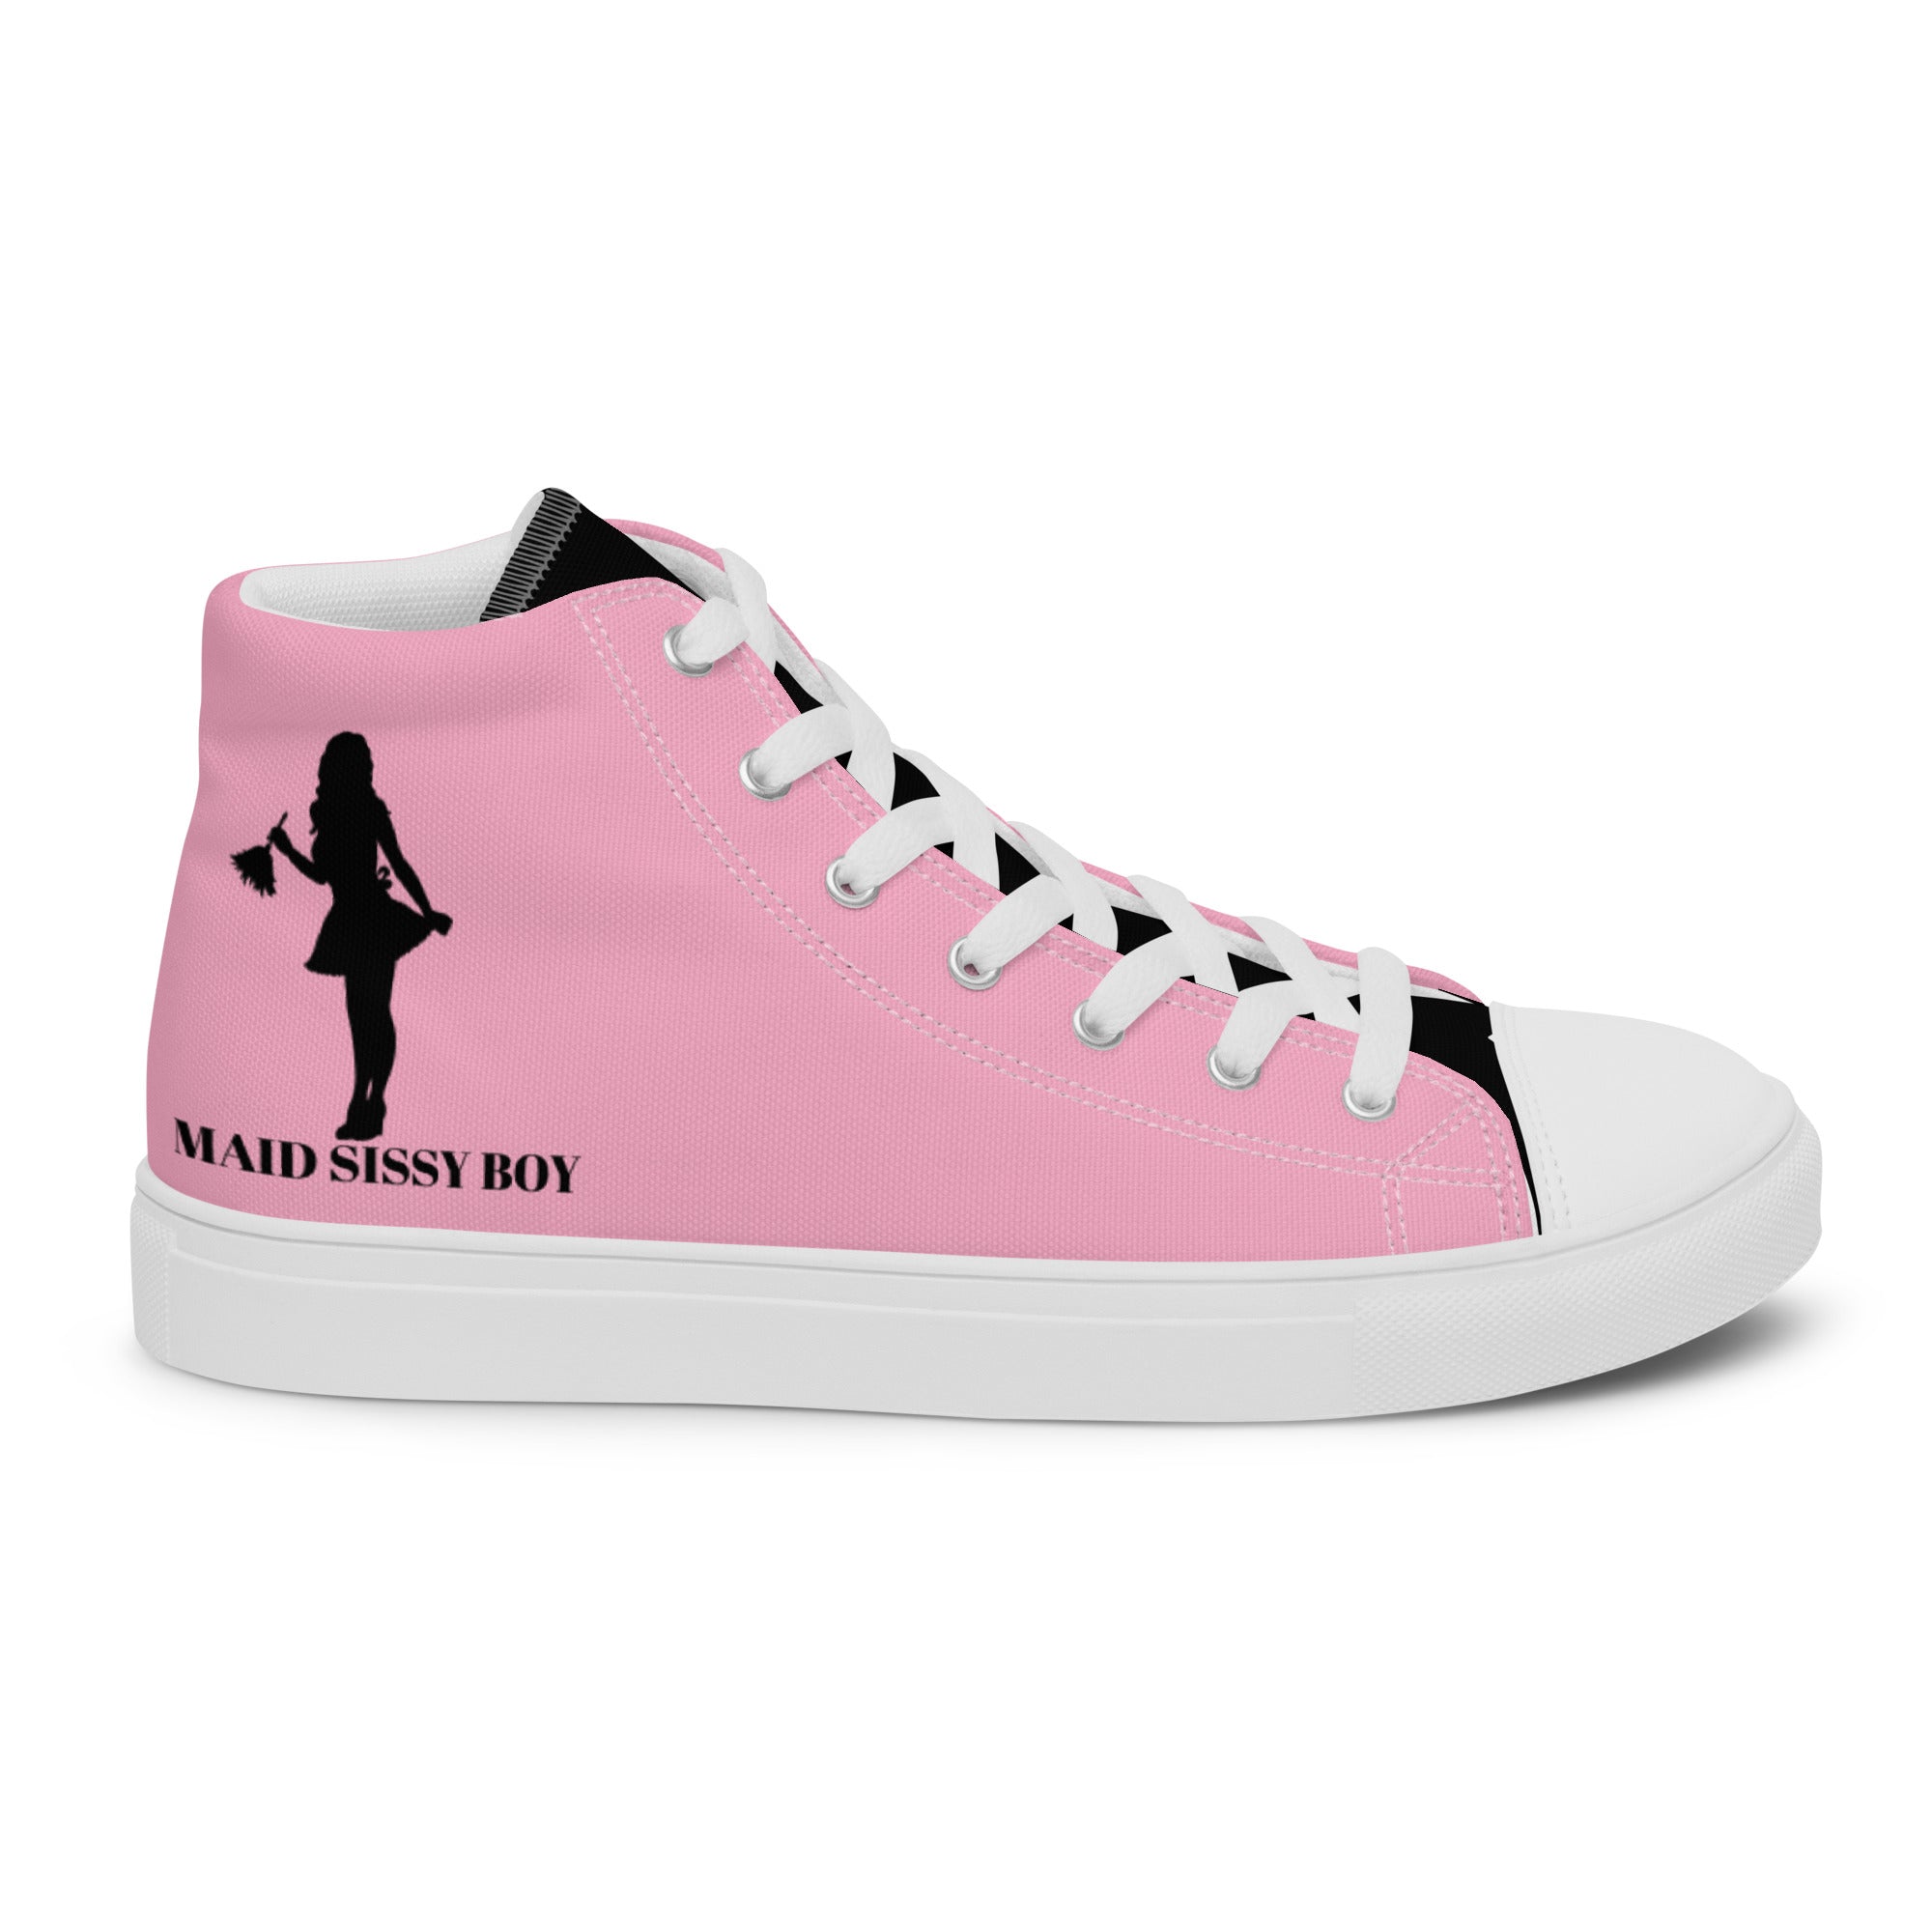 "Sissy Geneva" High Top Canvas Shoes